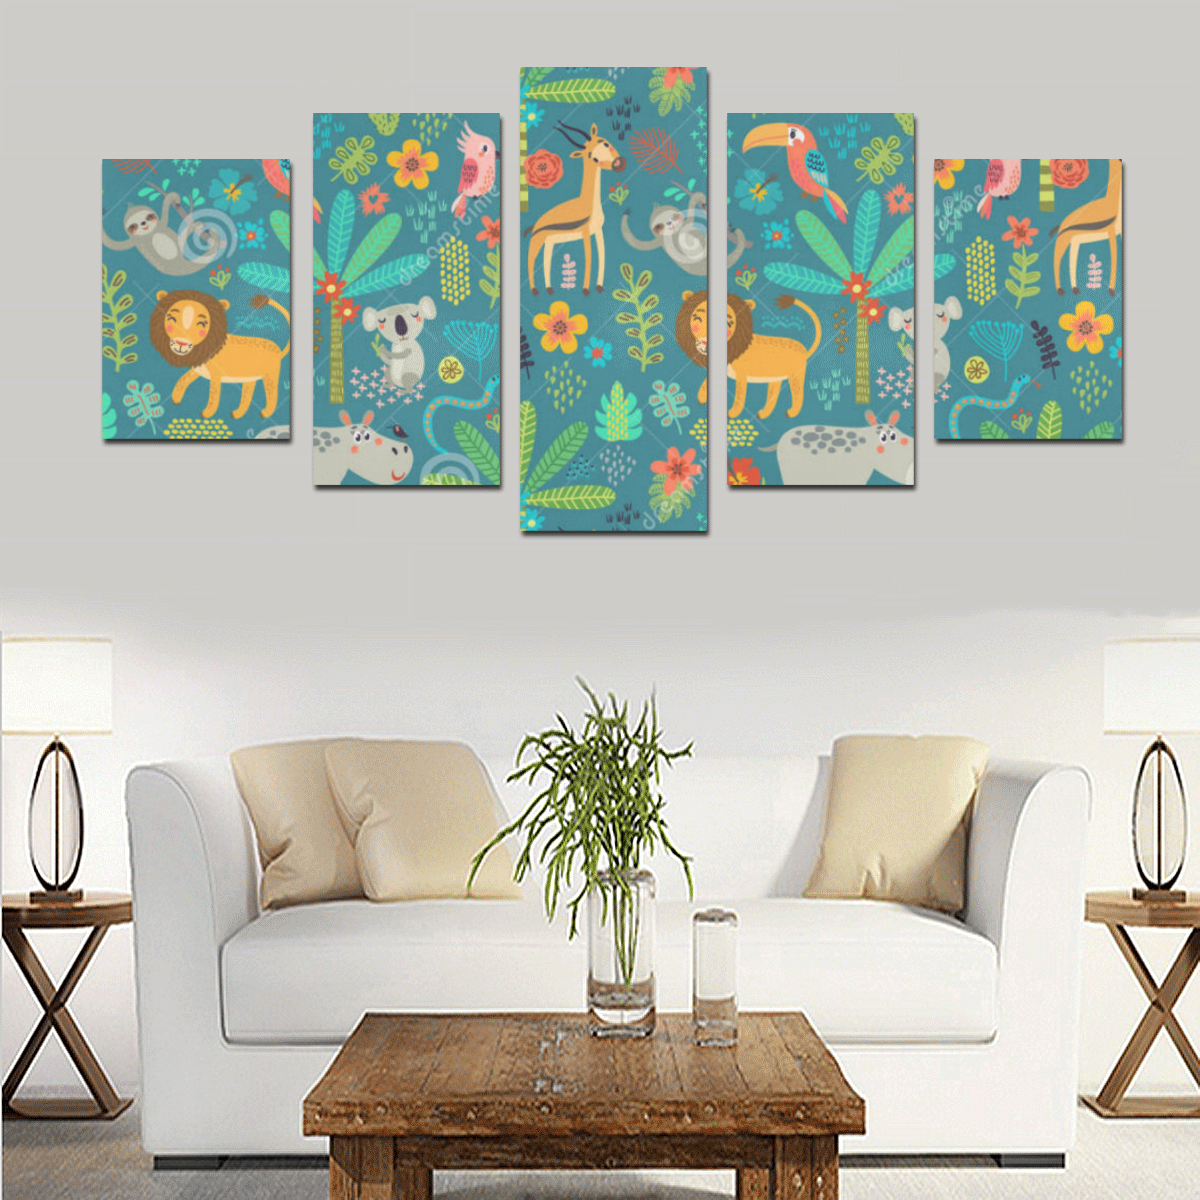 seamless-pattern-jungle-animals-flowers-trees-9181 Canvas Print Sets D (No Frame)